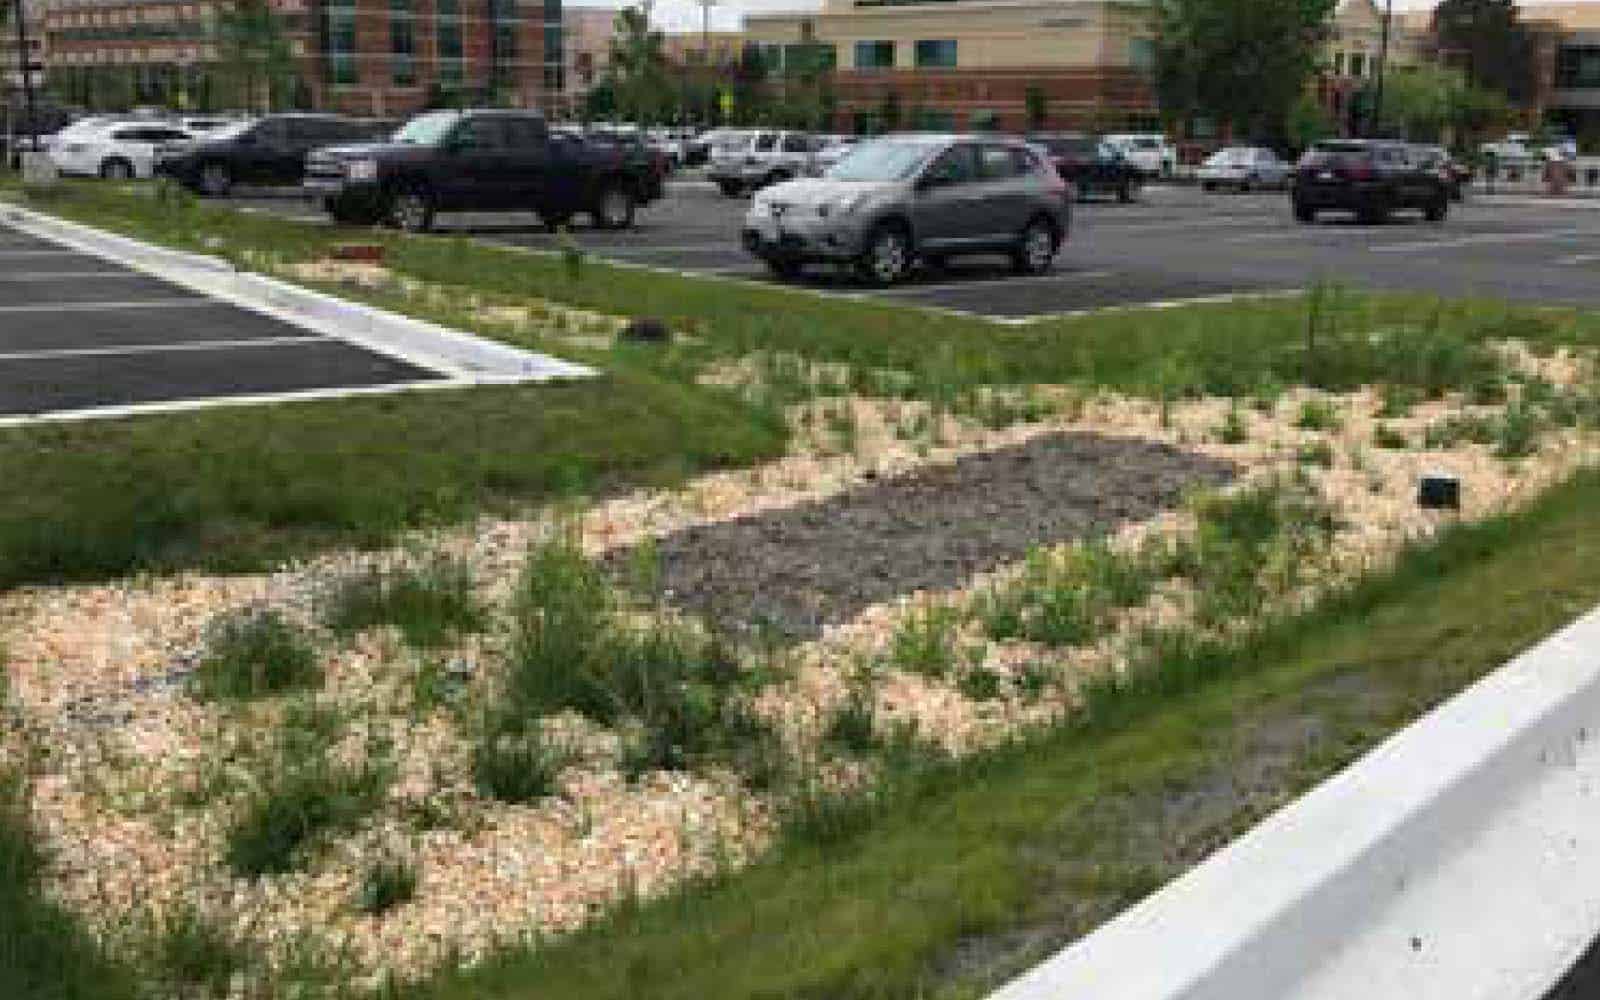 Case studies - this biofiltration system met stormwater requirements and maximized parking spaces